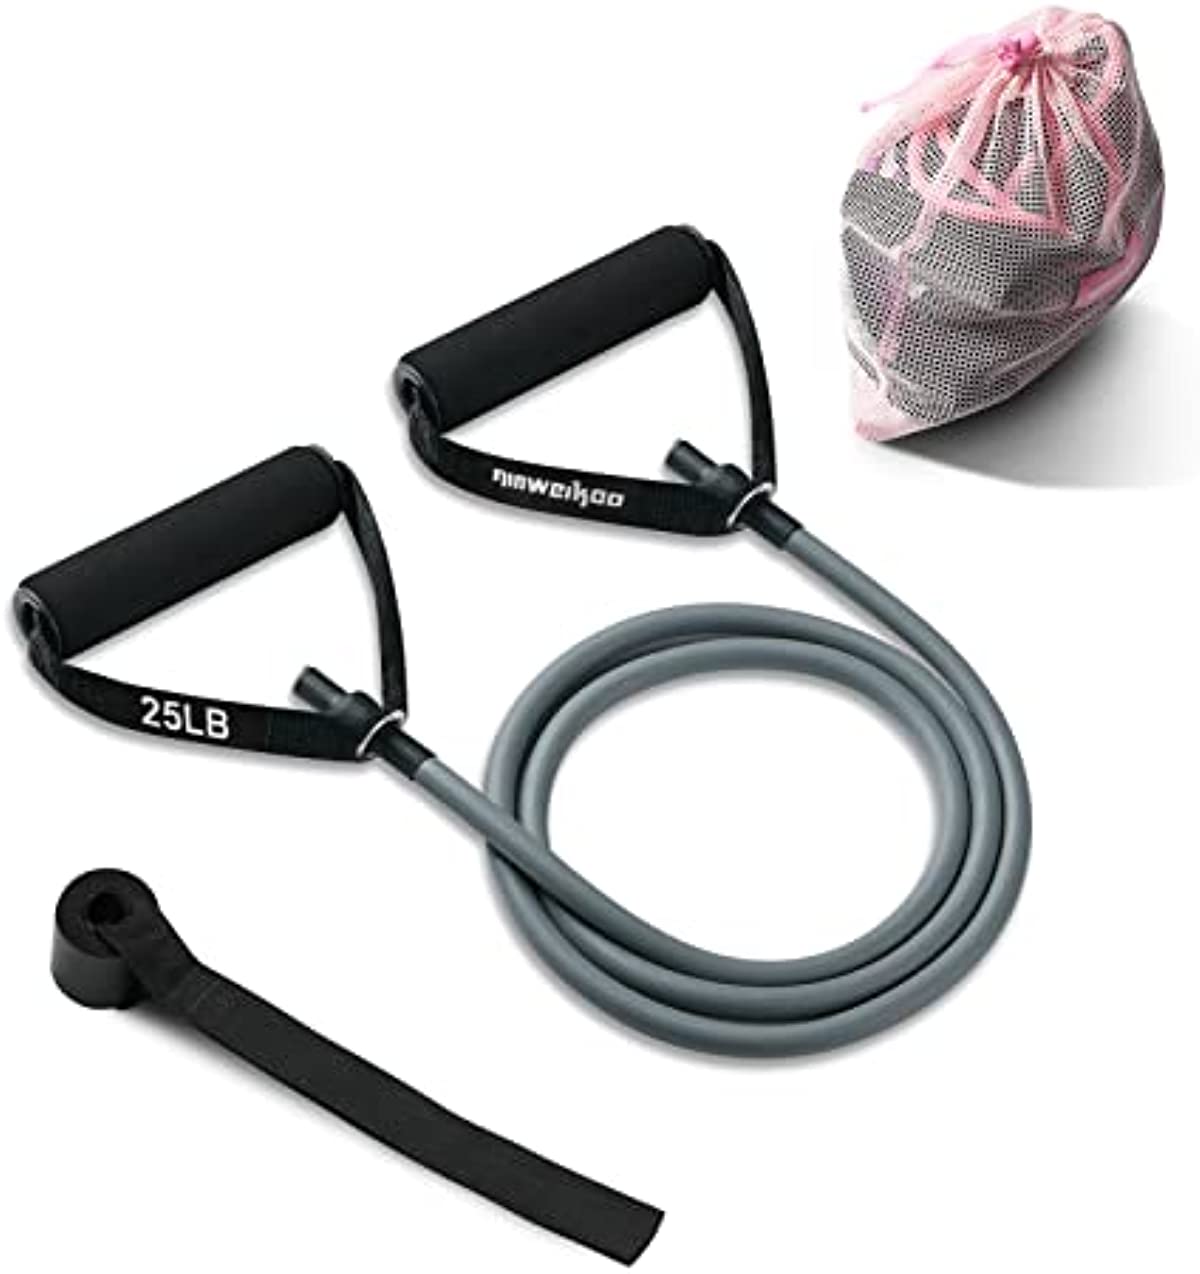 Resistance Exercise Band with Handles, Workout Band Weight Band for Physical Therapy,Strength Training Home Gym Fitness ,with Door Anchor & Storage Bag.